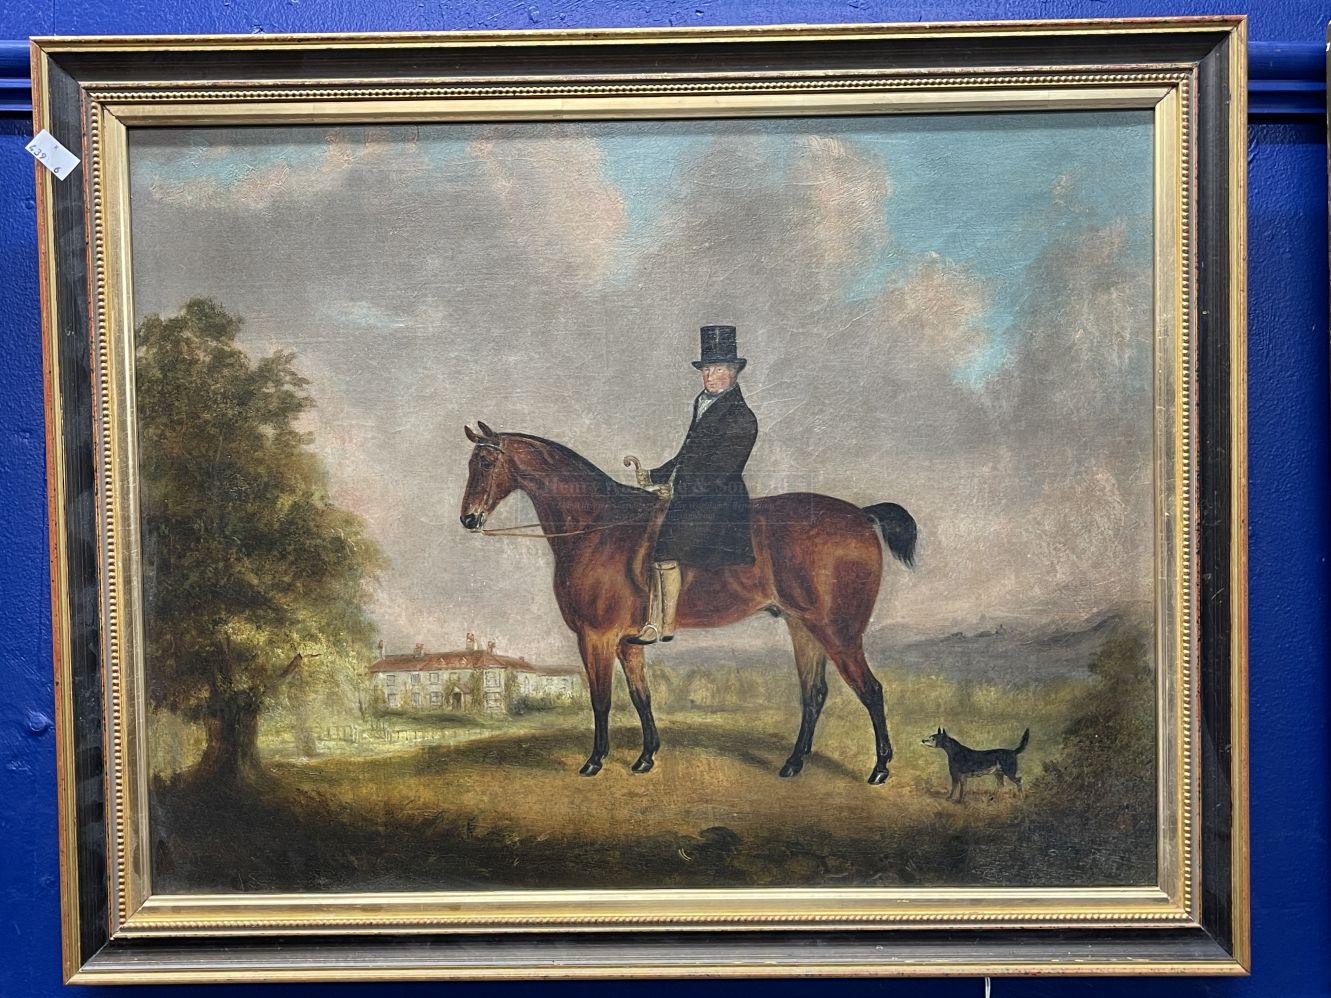 19th cent. English School: Oil on canvas, Gentleman Rider with Estate in background, attributed to